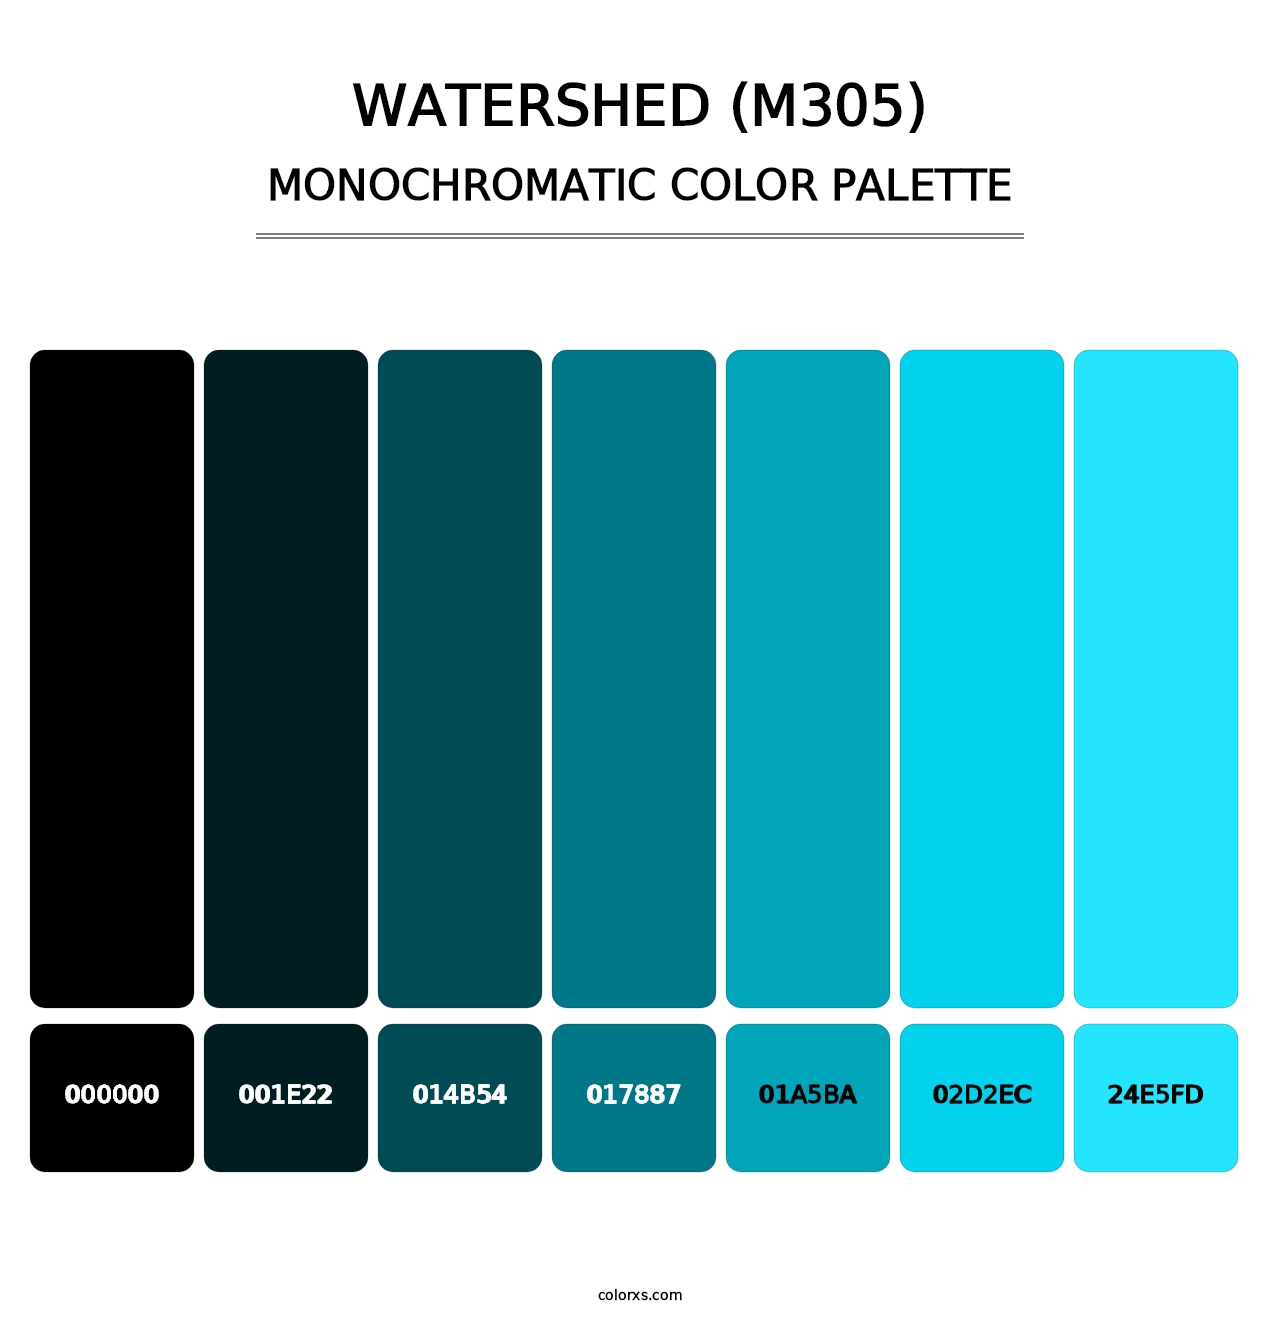 Watershed (M305) - Monochromatic Color Palette